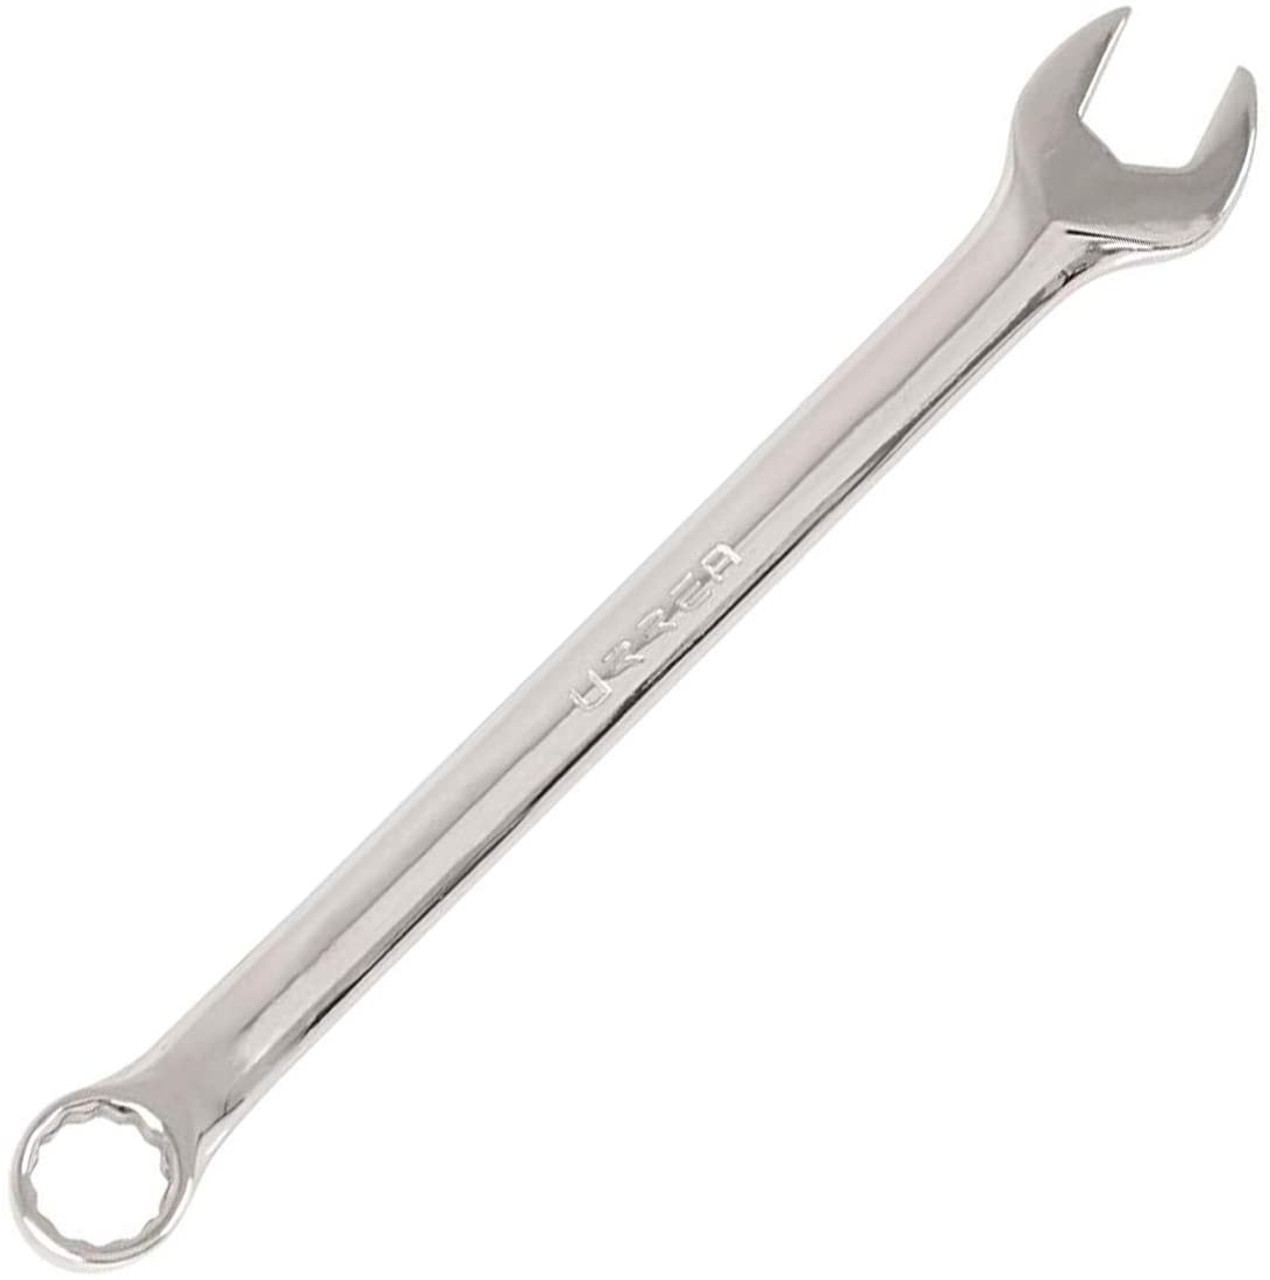 Full polished combination wrench, Size: 32mm, 12 point, Tool Length: 16-14/16"